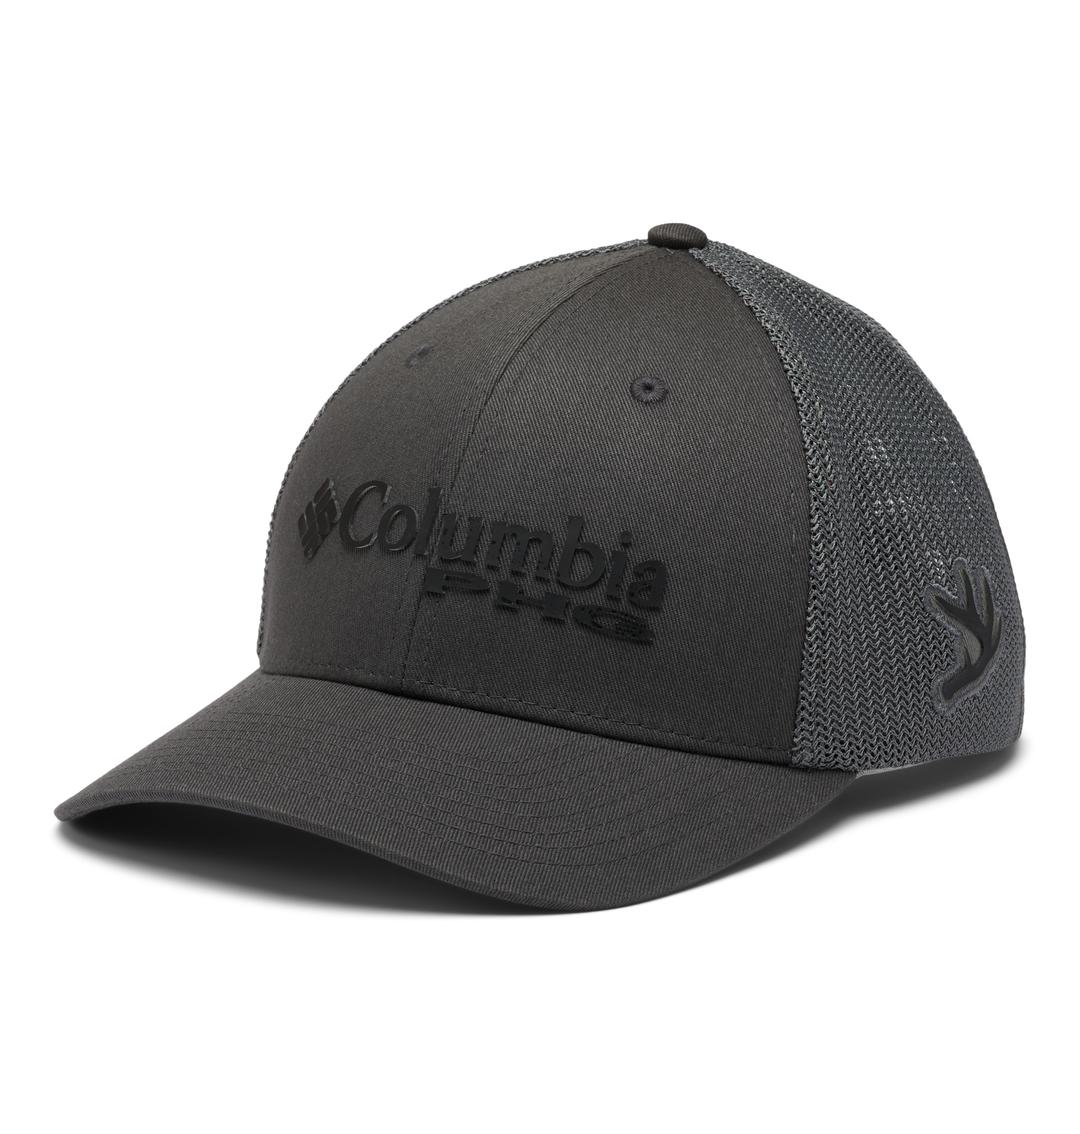 Columbia PHG Logo with Antlers Mesh Ball Cap - Charcoal, L/XL - 2010831028